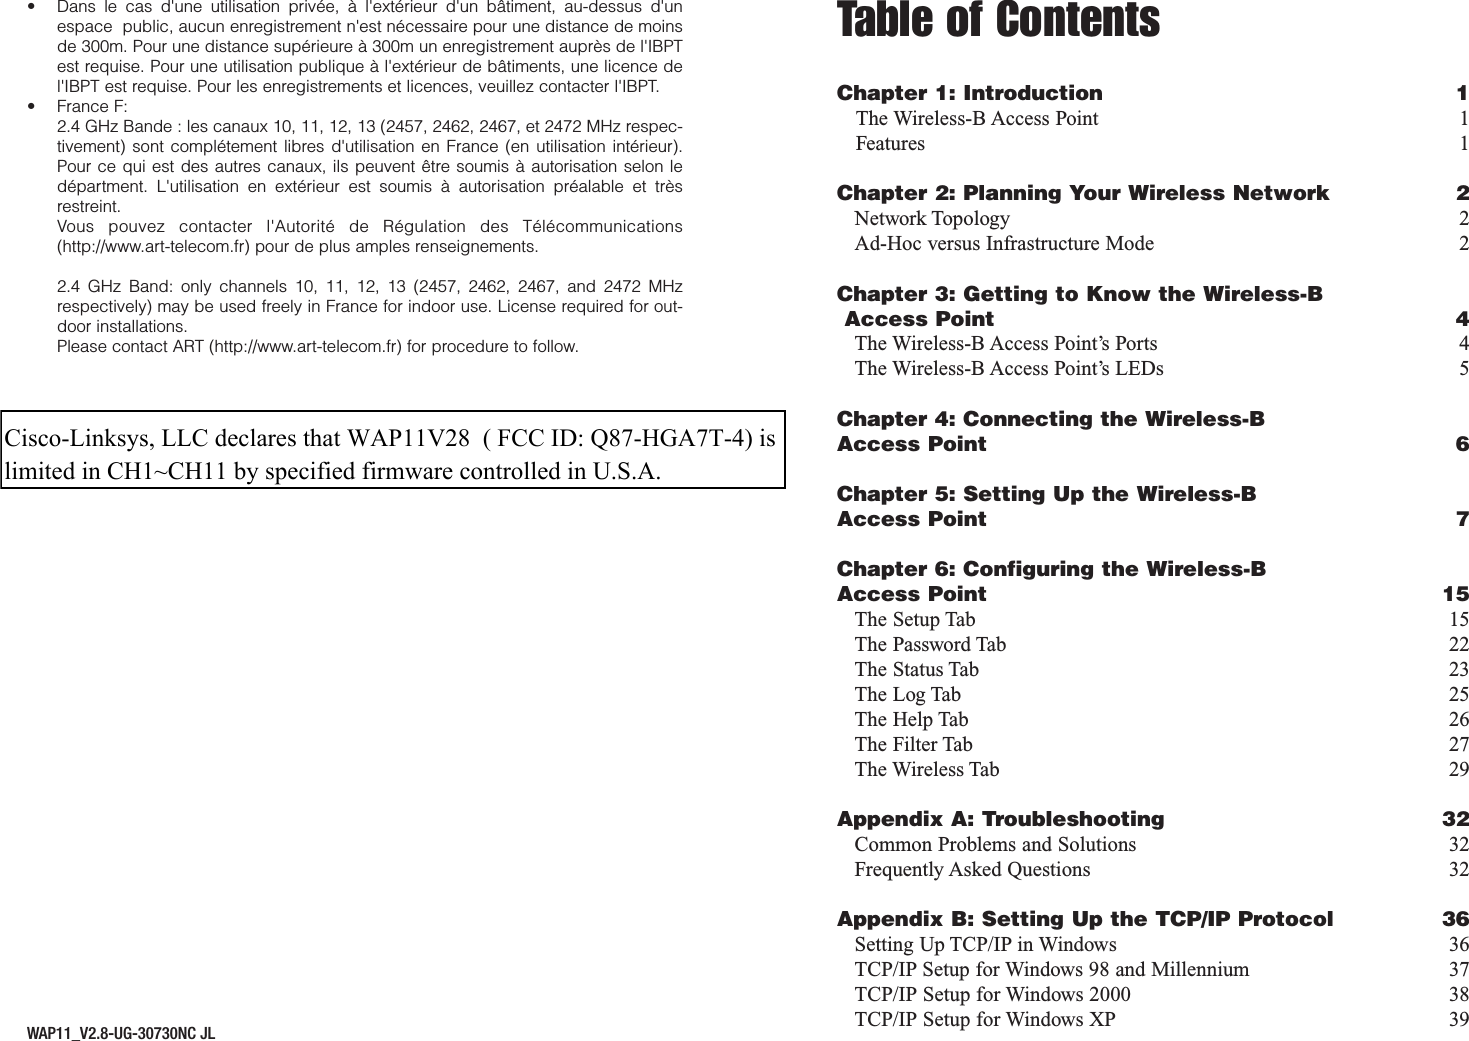 Table of ContentsChapter 1: Introduction 1The Wireless-B Access Point 1Features 1Chapter 2: Planning Your Wireless Network 2Network Topology 2Ad-Hoc versus Infrastructure Mode 2Chapter 3: Getting to Know the Wireless-BAccess Point 4The Wireless-B Access Point’s Ports 4The Wireless-B Access Point’s LEDs 5Chapter 4: Connecting the Wireless-B Access Point 6Chapter 5: Setting Up the Wireless-B Access Point 7Chapter 6: Configuring the Wireless-BAccess Point 15The Setup Tab 15The Password Tab 22The Status Tab 23The Log Tab 25The Help Tab 26The Filter Tab 27The Wireless Tab 29Appendix A: Troubleshooting 32Common Problems and Solutions 32Frequently Asked Questions 32Appendix B: Setting Up the TCP/IP Protocol 36Setting Up TCP/IP in Windows 36TCP/IP Setup for Windows 98 and Millennium 37TCP/IP Setup for Windows 2000 38TCP/IP Setup for Windows XP 39• Dans le cas d&apos;une utilisation privée, à l&apos;extérieur d&apos;un bâtiment, au-dessus d&apos;unespace  public, aucun enregistrement n&apos;est nécessaire pour une distance de moinsde 300m. Pour une distance supérieure à 300m un enregistrement auprès de l&apos;IBPTest requise. Pour une utilisation publique à l&apos;extérieur de bâtiments, une licence del&apos;IBPT est requise. Pour les enregistrements et licences, veuillez contacter l&apos;IBPT.• France F: 2.4 GHz Bande : les canaux 10, 11, 12, 13 (2457, 2462, 2467, et 2472 MHz respec-tivement) sont complétement libres d&apos;utilisation en France (en utilisation intérieur).Pour ce qui est des autres canaux, ils peuvent être soumis à autorisation selon ledépartment. L&apos;utilisation en extérieur est soumis à autorisation préalable et trèsrestreint. Vous pouvez contacter l&apos;Autorité de Régulation des Télécommunications(http://www.art-telecom.fr) pour de plus amples renseignements.2.4 GHz Band: only channels 10, 11, 12, 13 (2457, 2462, 2467, and 2472 MHzrespectively) may be used freely in France for indoor use. License required for out-door installations.Please contact ART (http://www.art-telecom.fr) for procedure to follow.WAP11_V2.8-UG-30730NC JLCisco-Linksys, LLC declares that WAP11V28  ( FCC ID: Q87-HGA7T-4) is limited in CH1~CH11 by specified firmware controlled in U.S.A. 